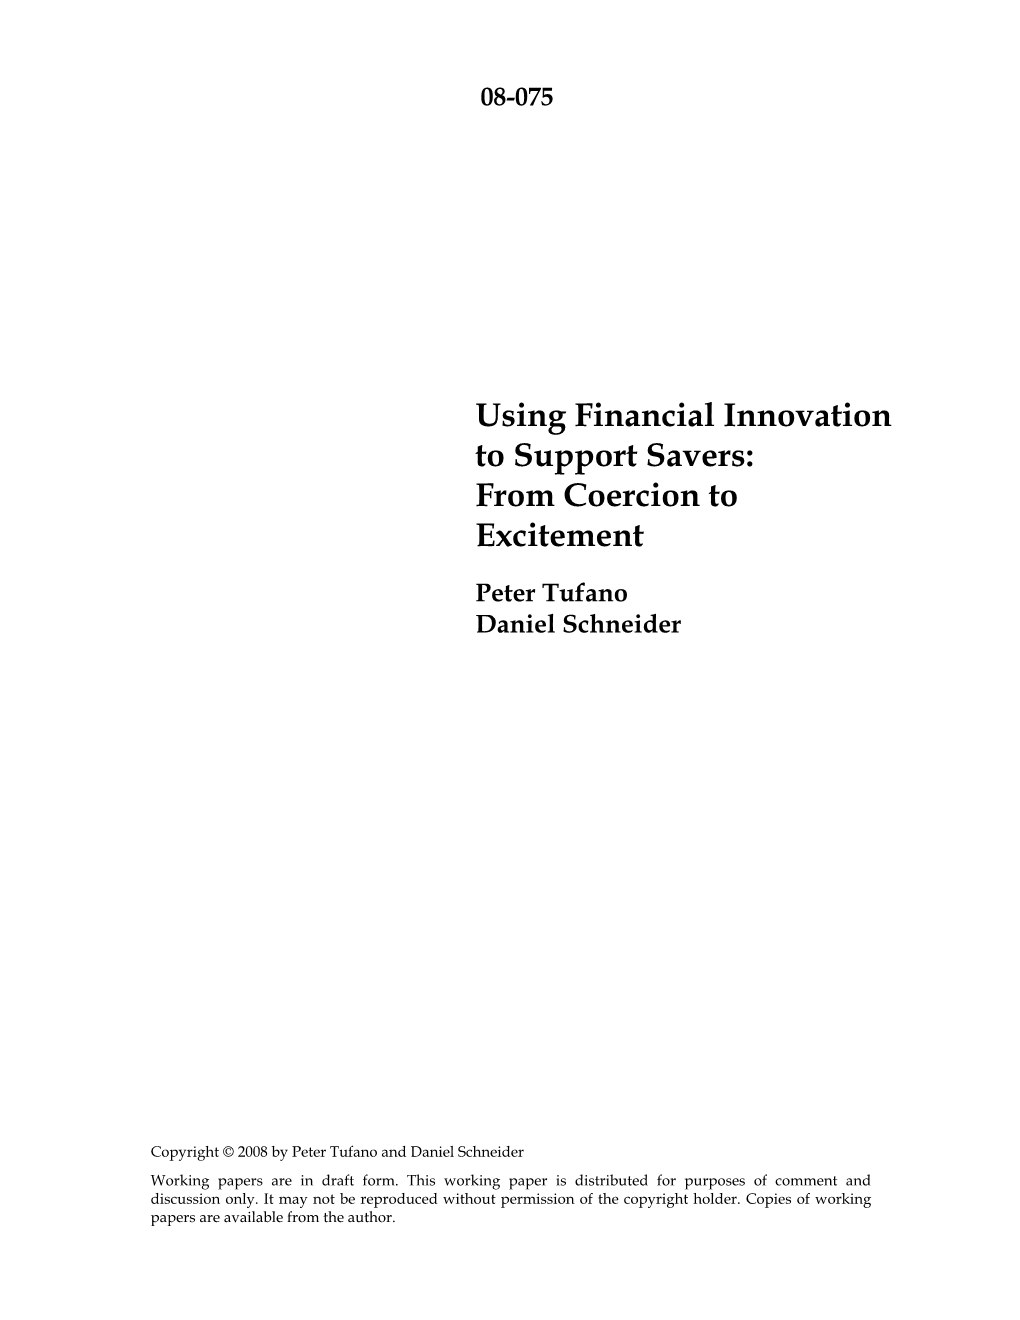 Using Financial Innovation to Support Savers: from Coercion to Excitement